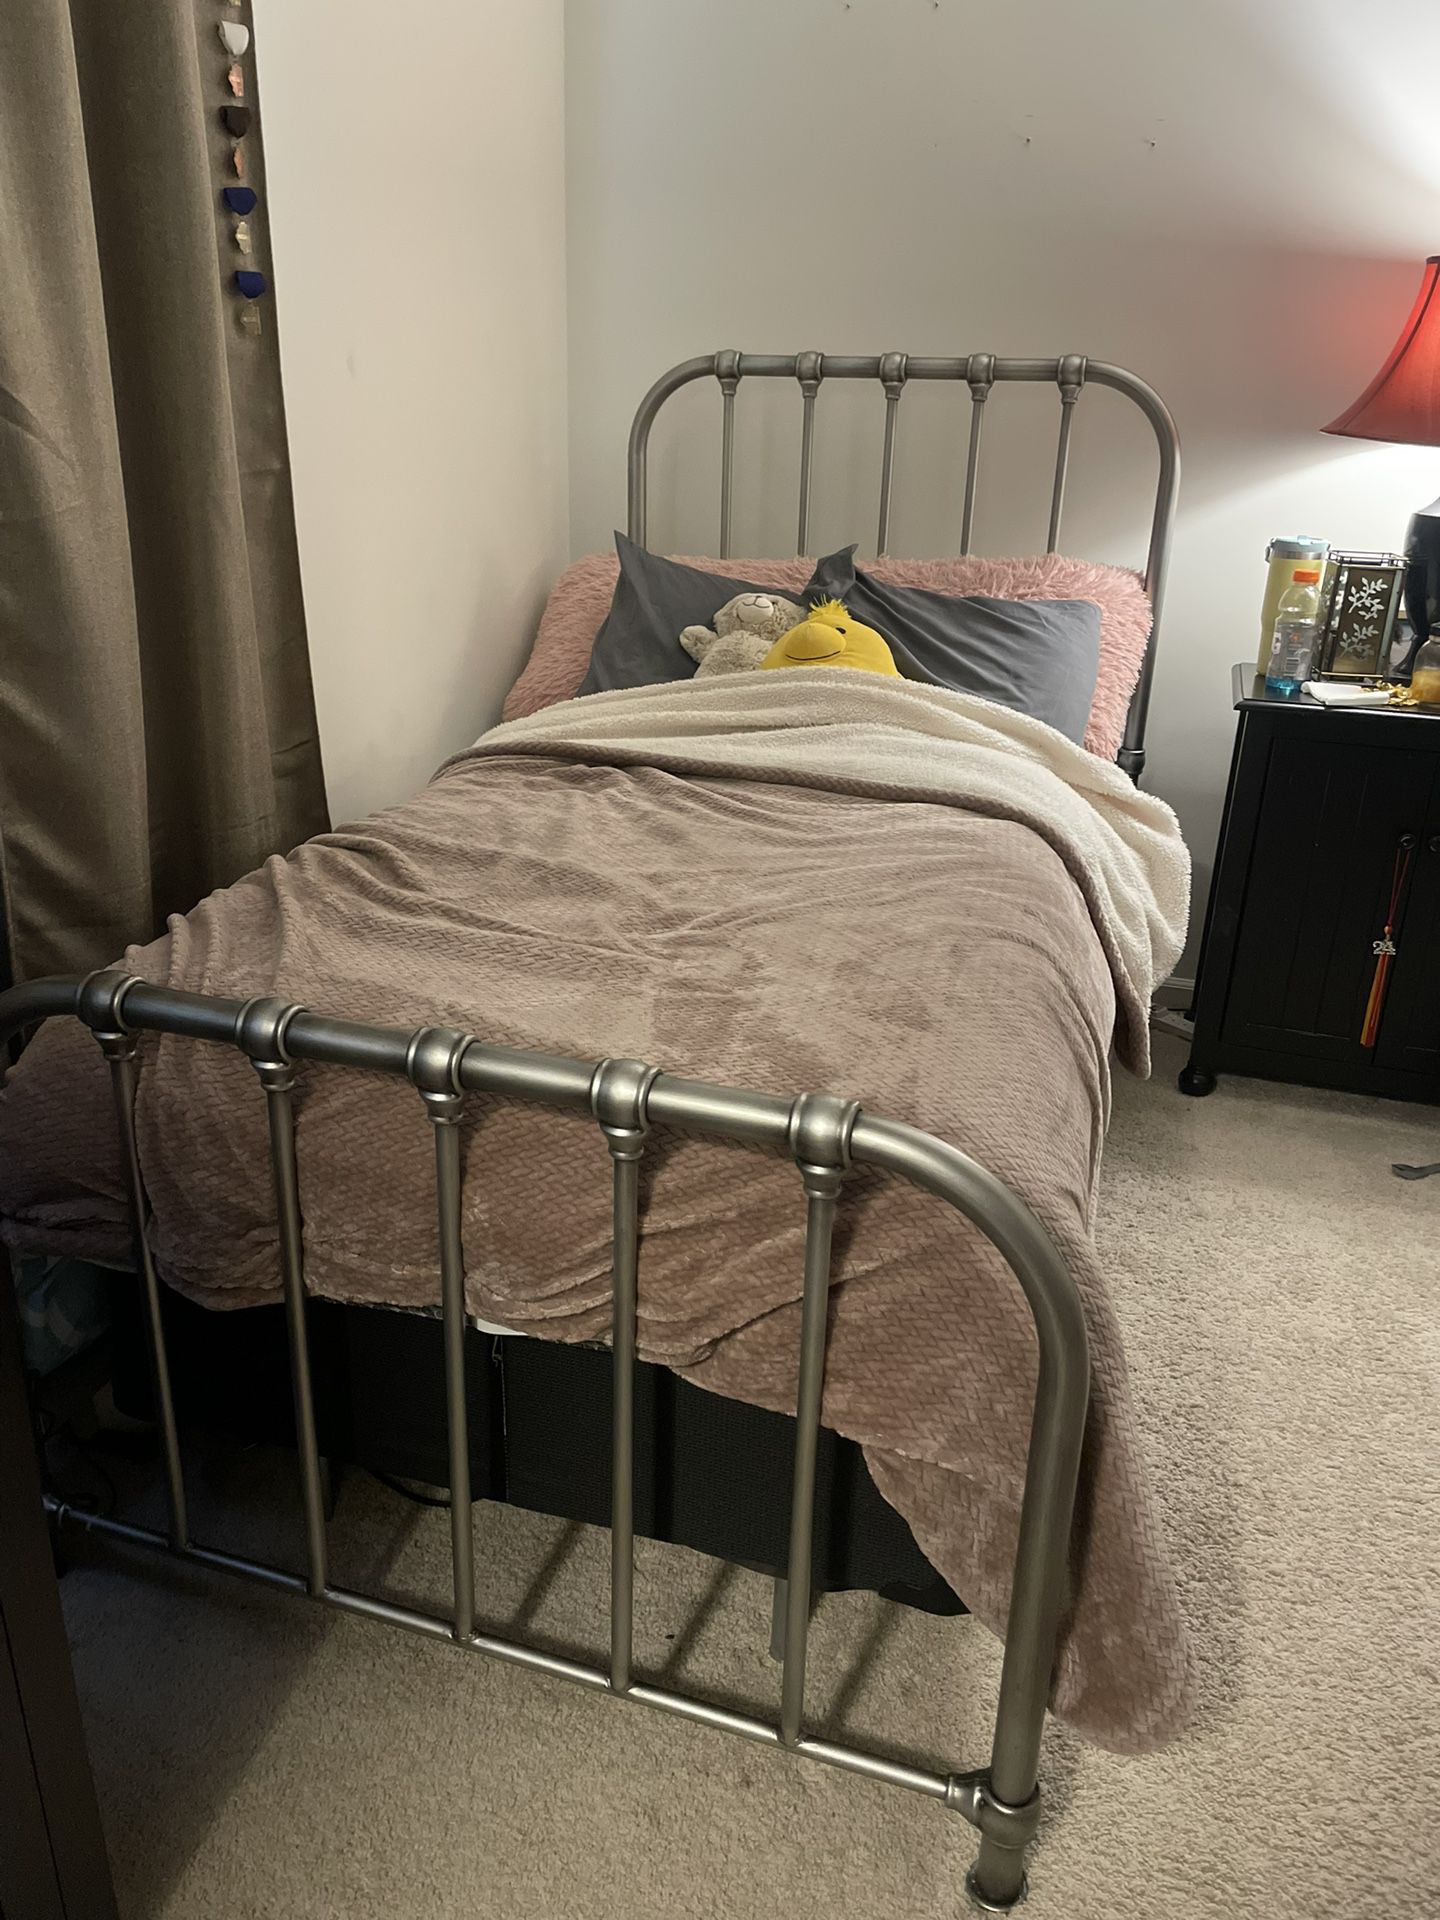  Twin Size Bed Frames